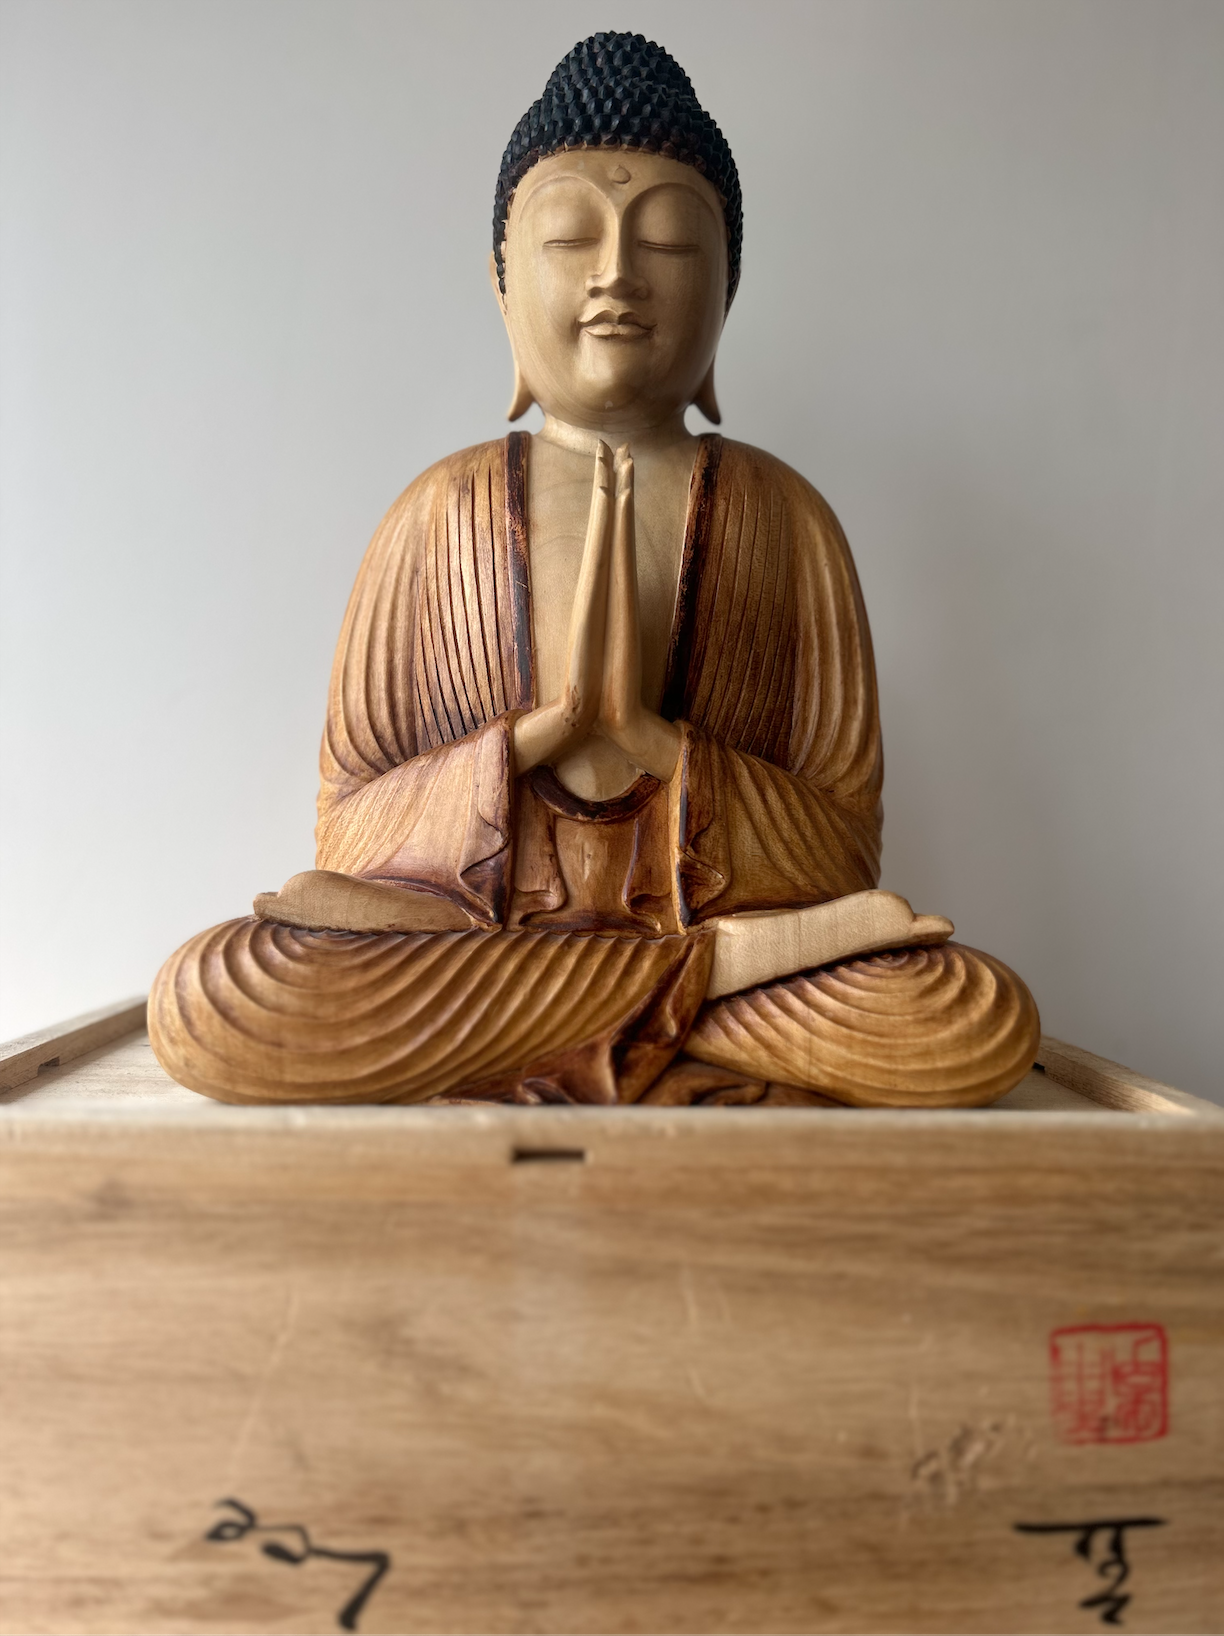 This statue of the Buddha was purchased for the Pharmacy studio and to accompany the members of the Opening Heart Mindfulness Community in their practice. It is of Korean origin. This statue depicts the Buddha with his hands pressed together in anjali mudra. This mudra has been widely used in Asian art and religious artifacts for centuries and connotes respect, greeting, and divine offering.